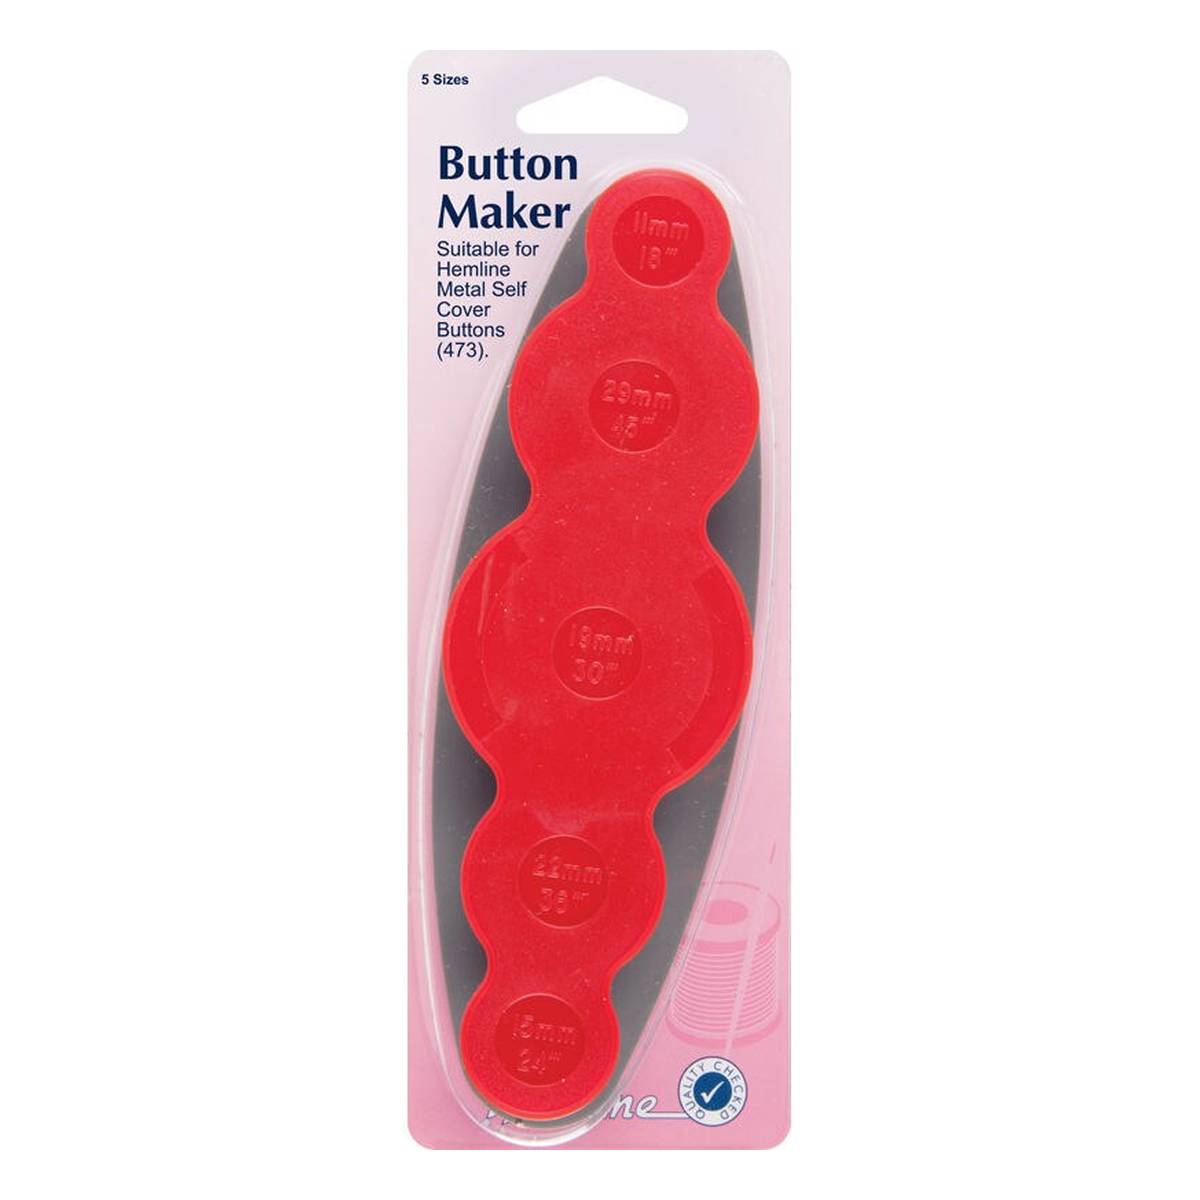 Button Making Tool, Self Cover Button Tool, Self Cover Buttons, Button  Press Tool, DIY Buttons, Fabric Button Tool, Haberdashery UK SHOP 